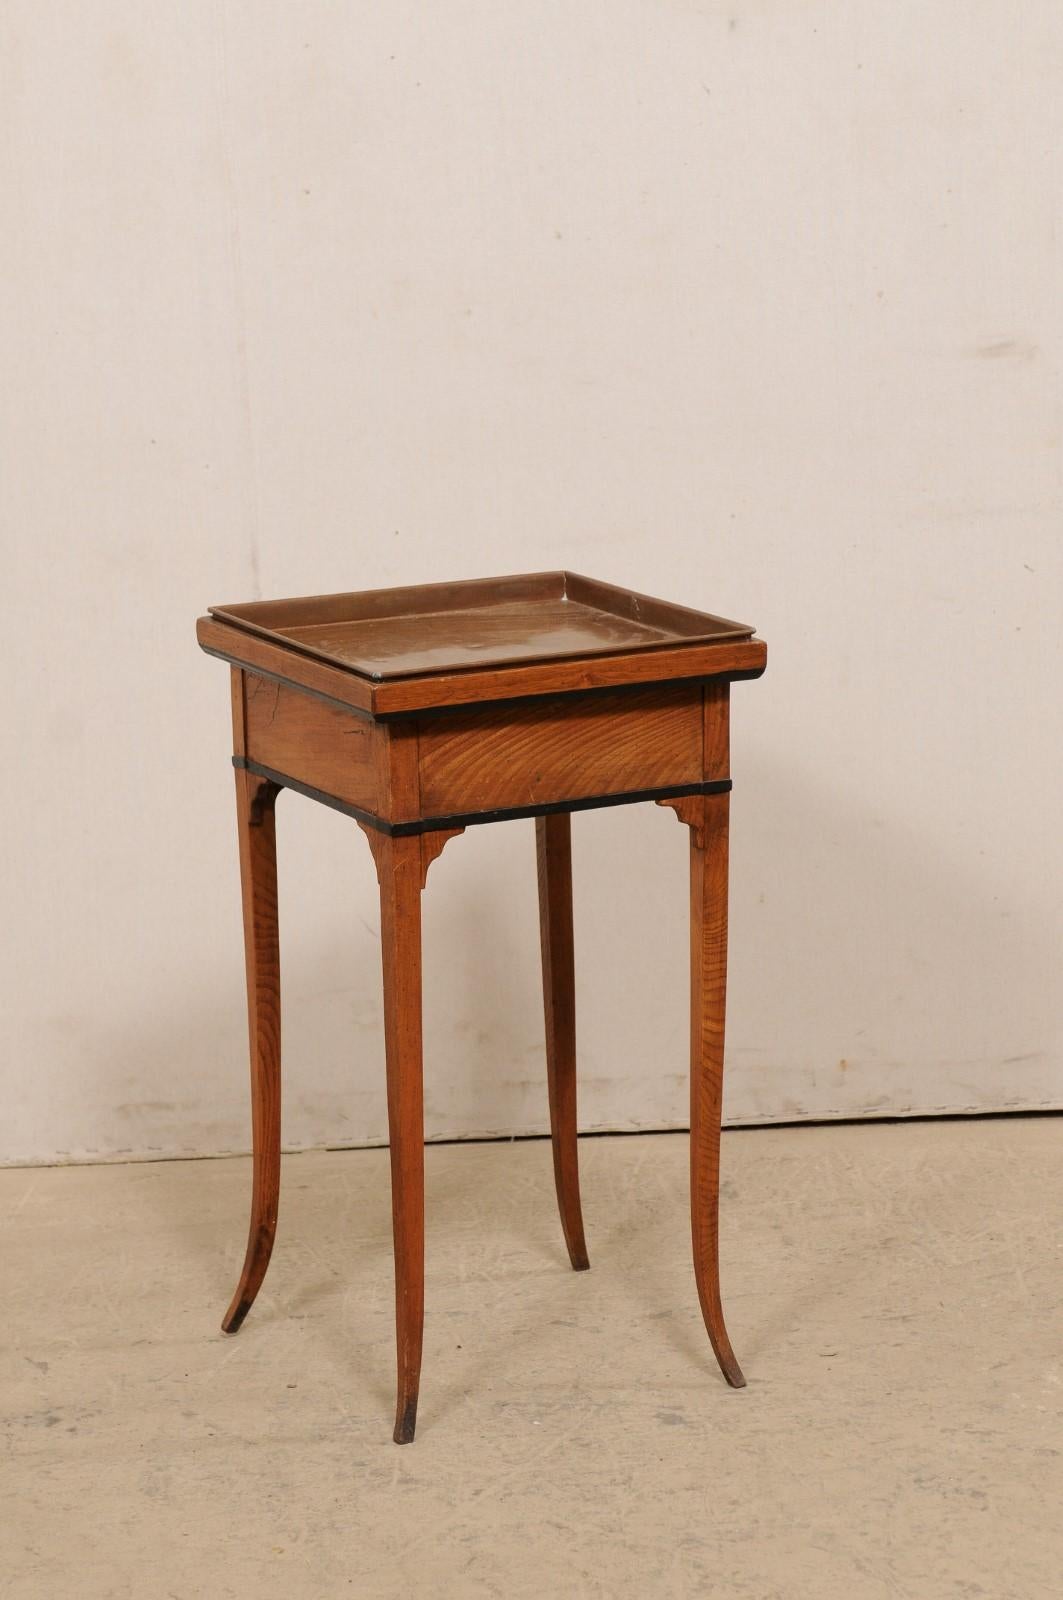 A Swedish wooden side table with removable copper tray top from the 19th century. This antique table from Sweden features a square-shaped top, which has a copper metal tray recessed within the top, which when removed, offers storage beneath. The